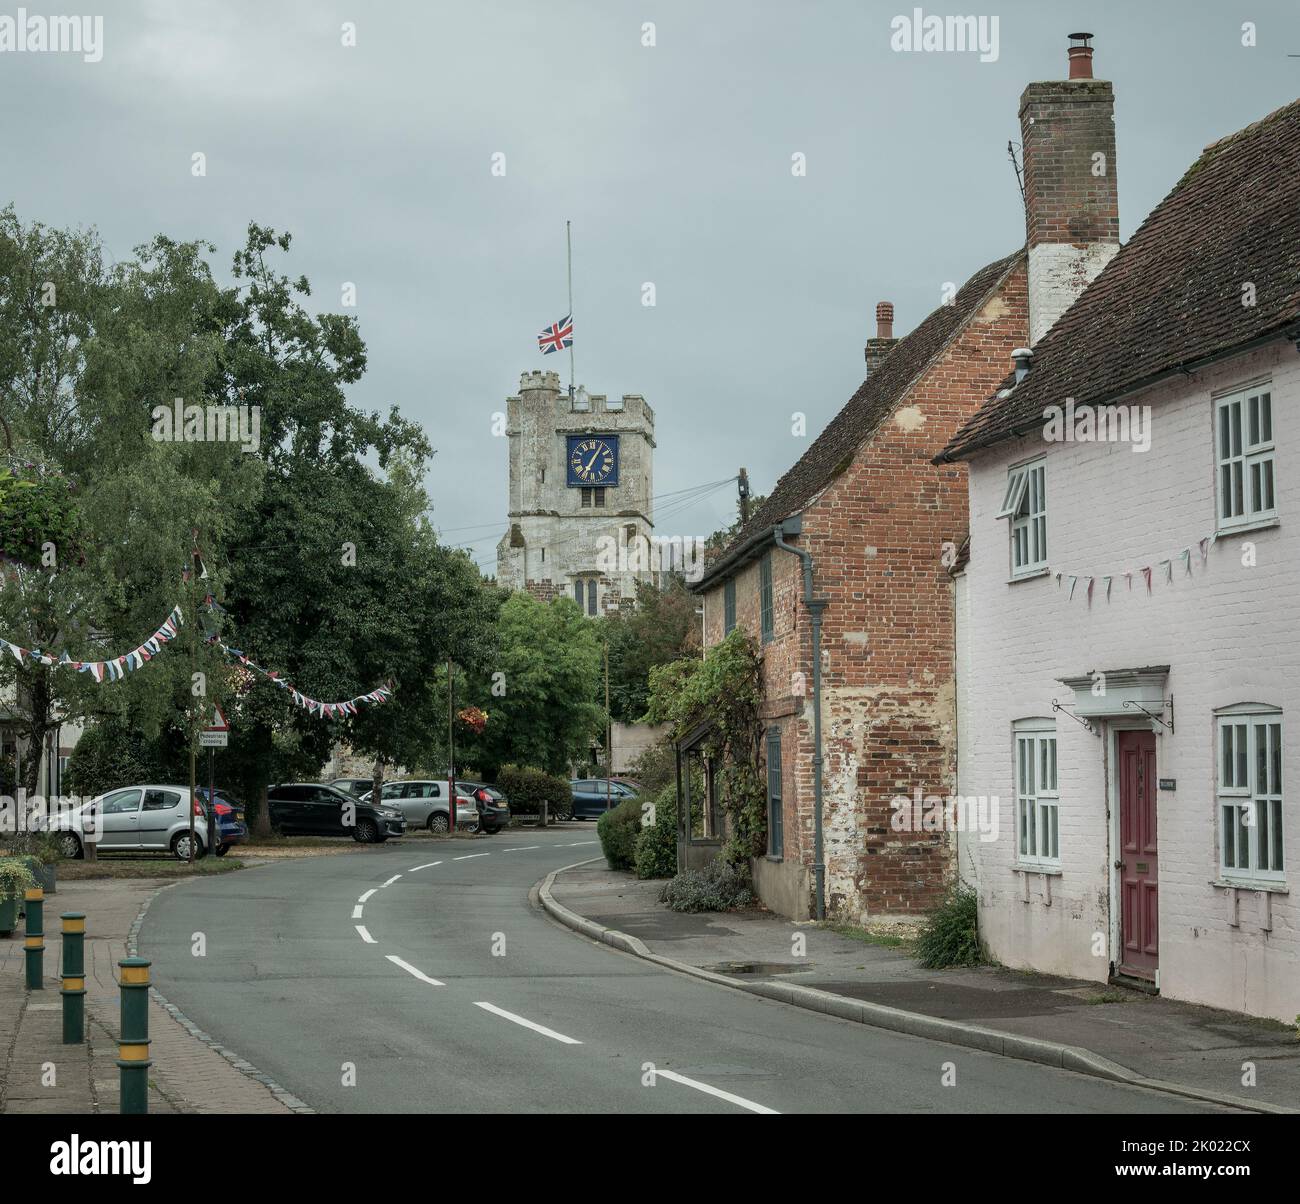 Fordingbridge, Hampshire, UK, 9th September 2022, a nation in mourning. A union jack flag flies at half mast over St Mary’s Church on Church Street the day after the death of Her Majesty Queen Elizabeth II. Paul Biggins/Alamy Live News Stock Photo